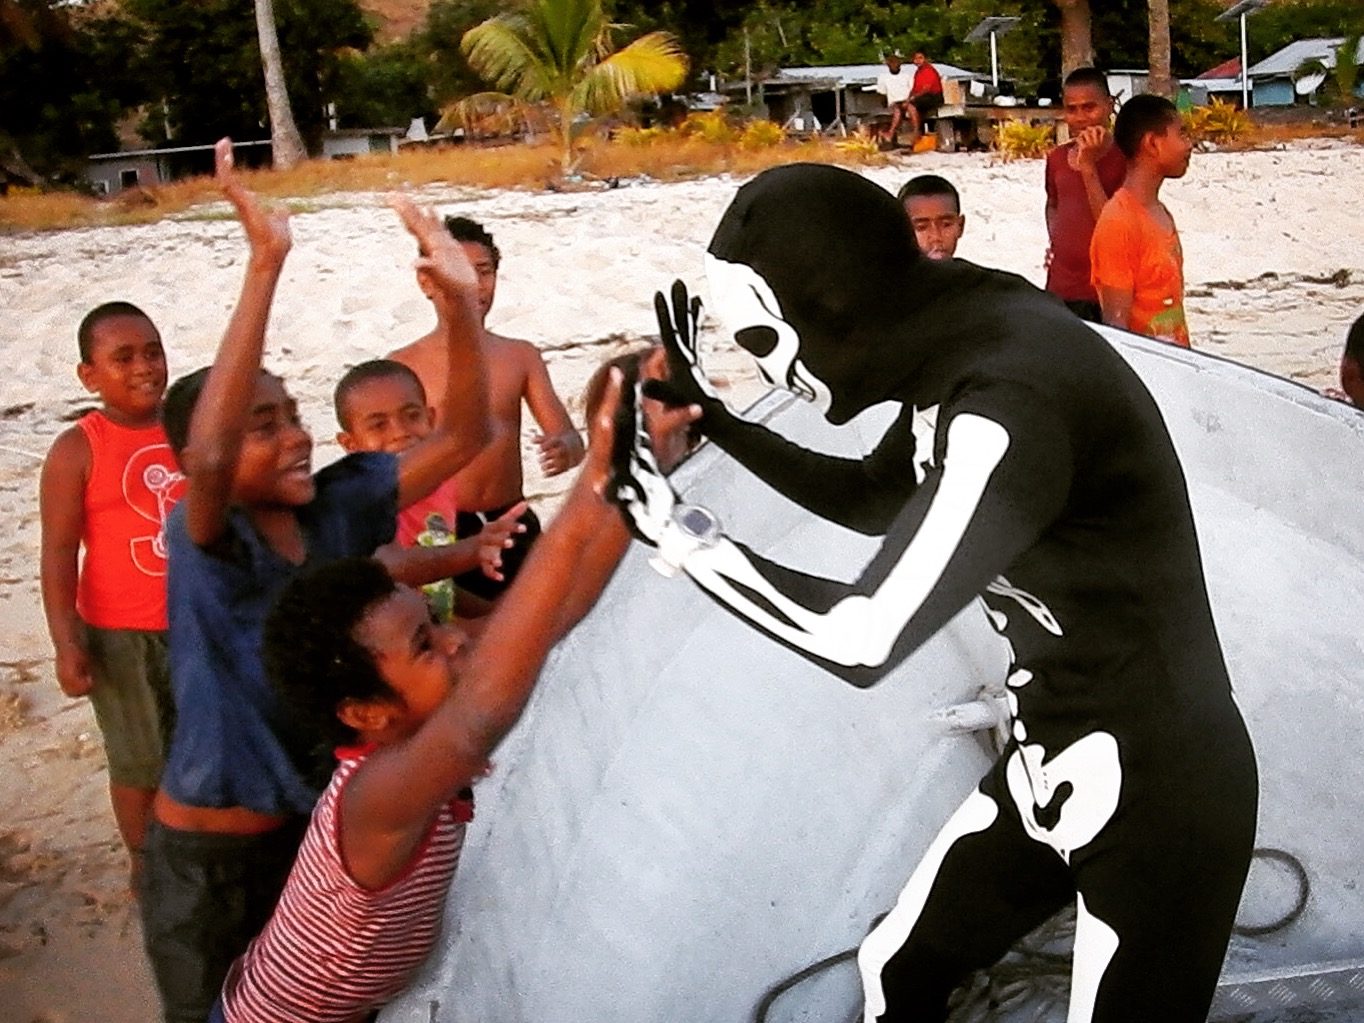 me dressed up in a skeleton morph suit for halloween playing with the local kids in Fiji